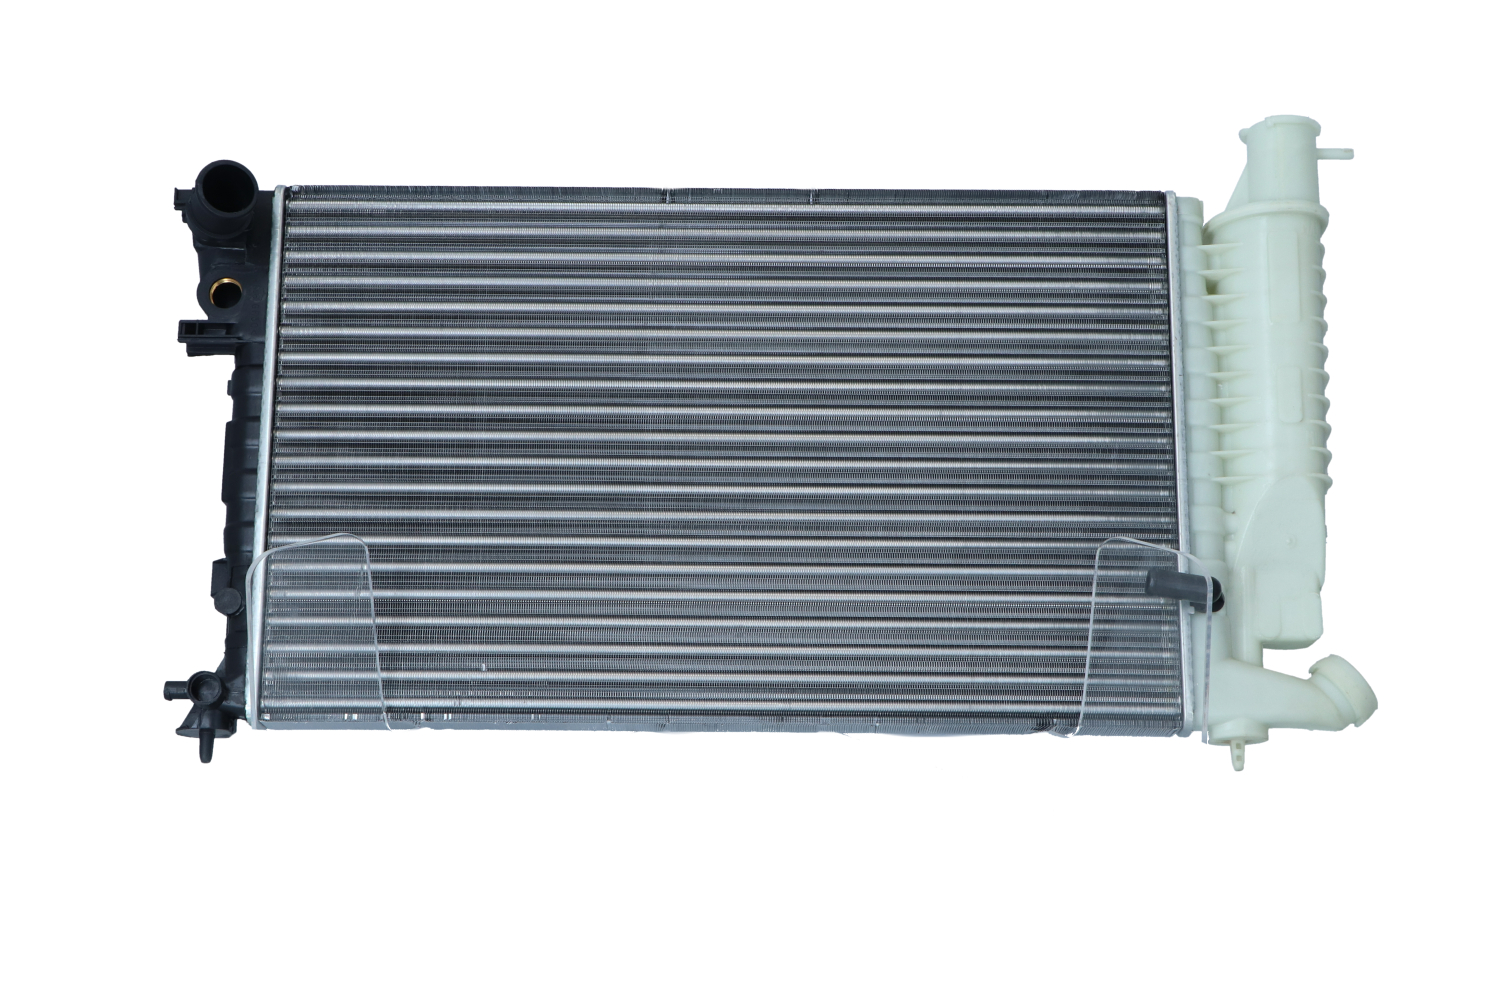 NRF Aluminium, 610 x 378 x 34 mm, Mechanically jointed cooling fins Radiator 50475 buy